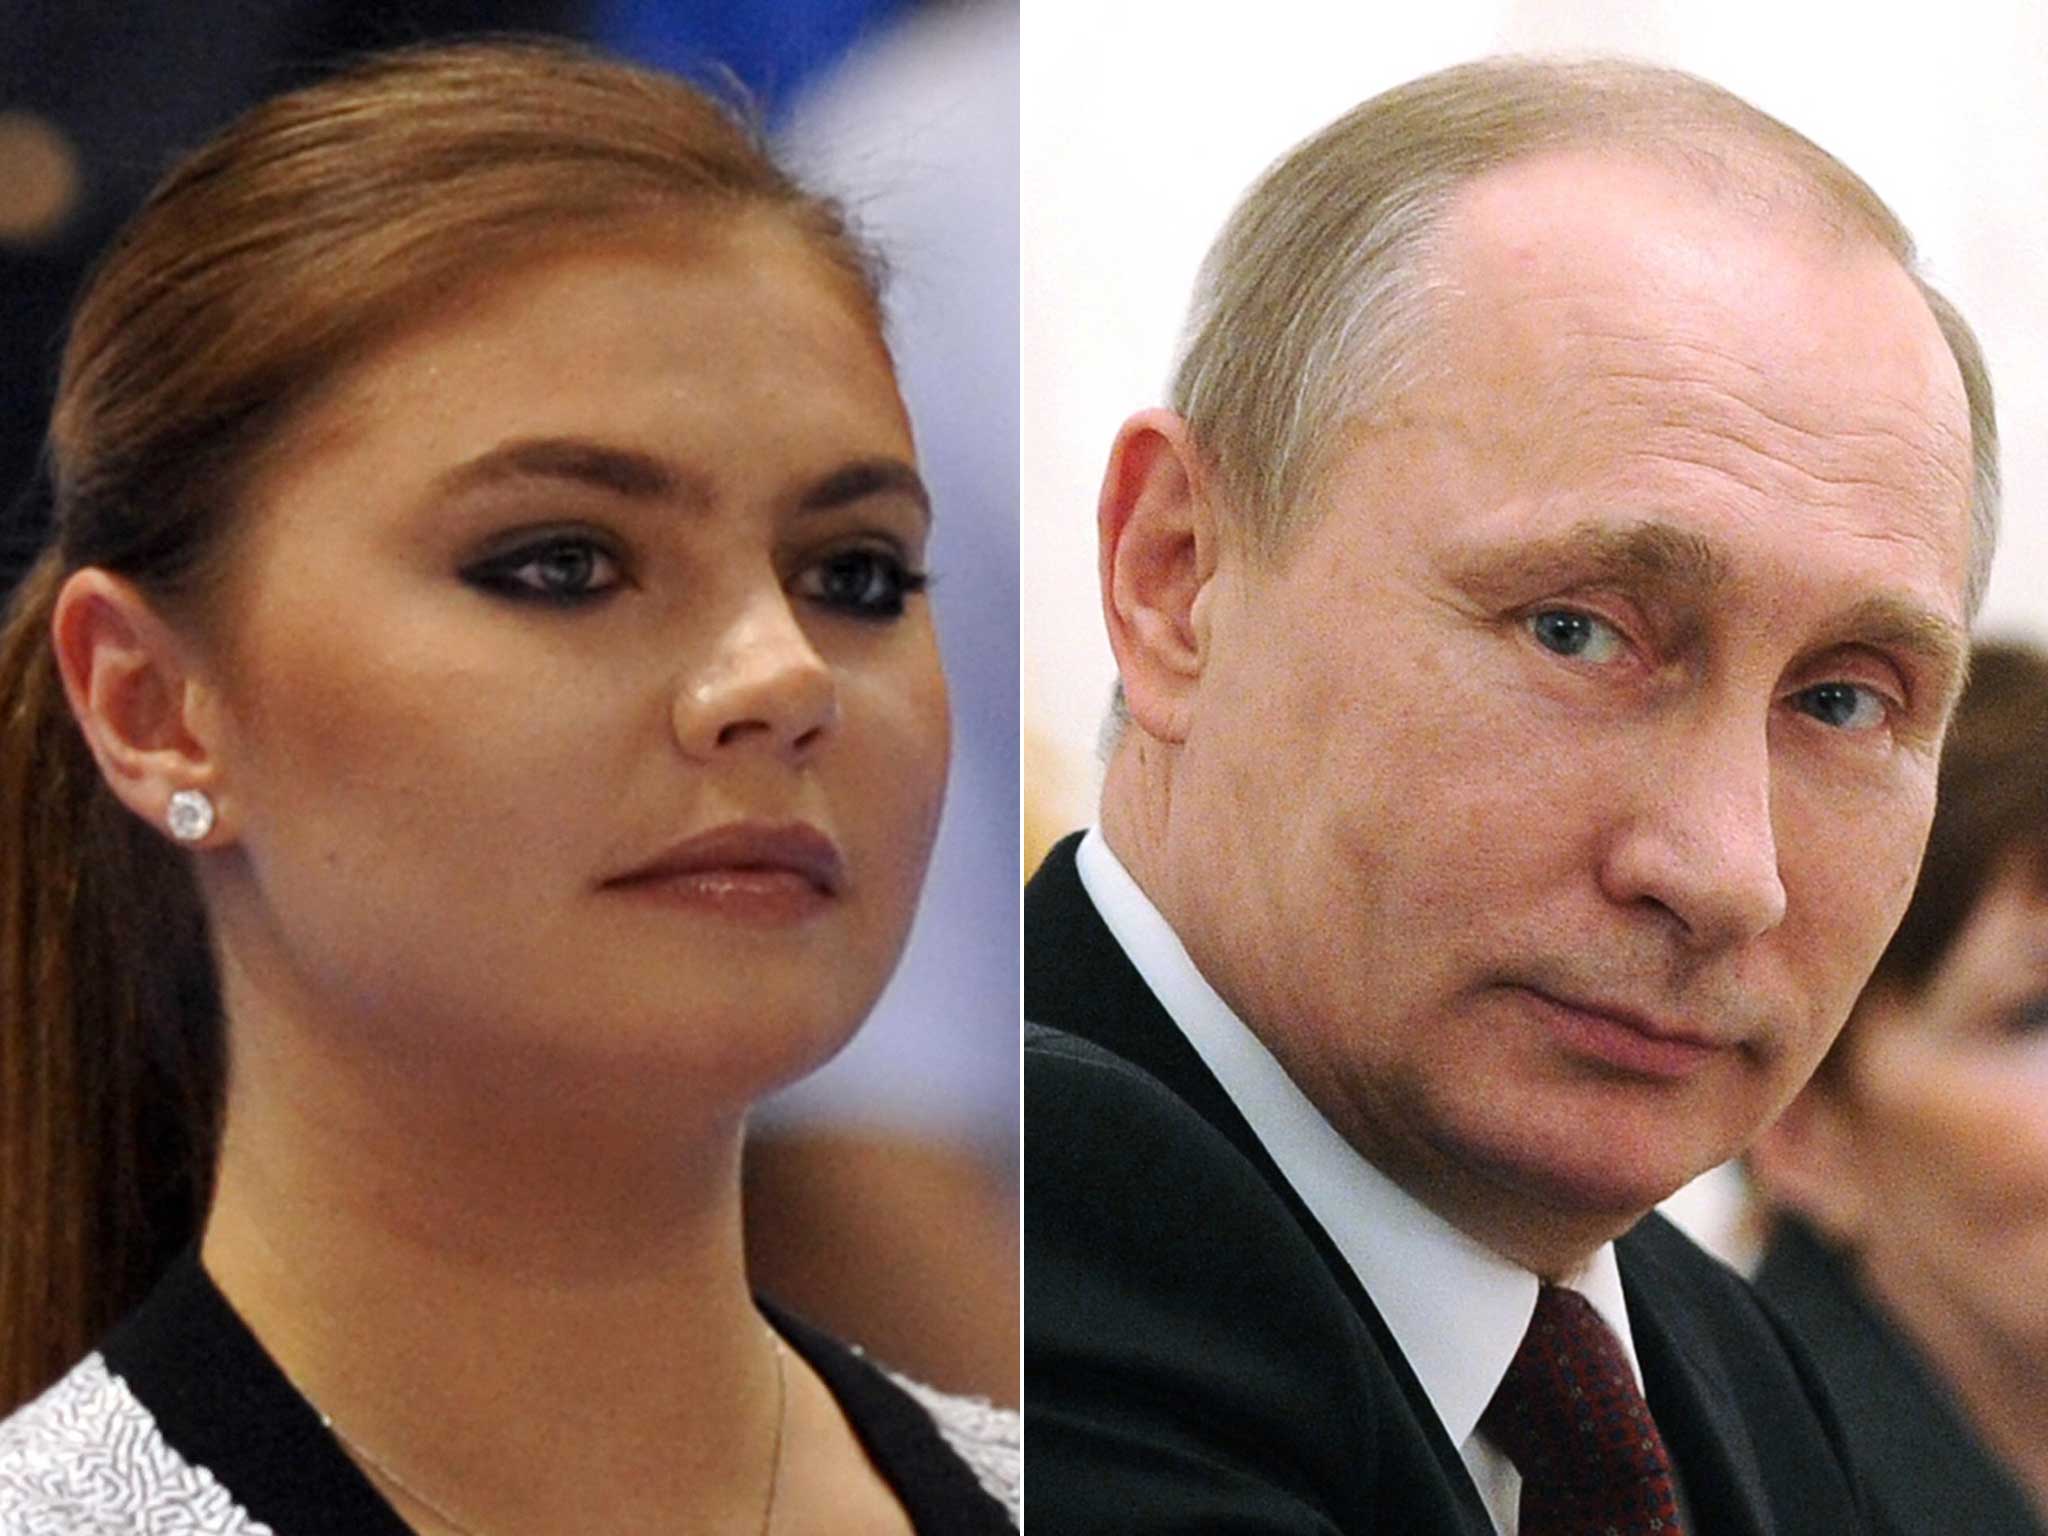 Ms Kabaeva is believed to have been in a relationship with the Russian president since the early 2000s